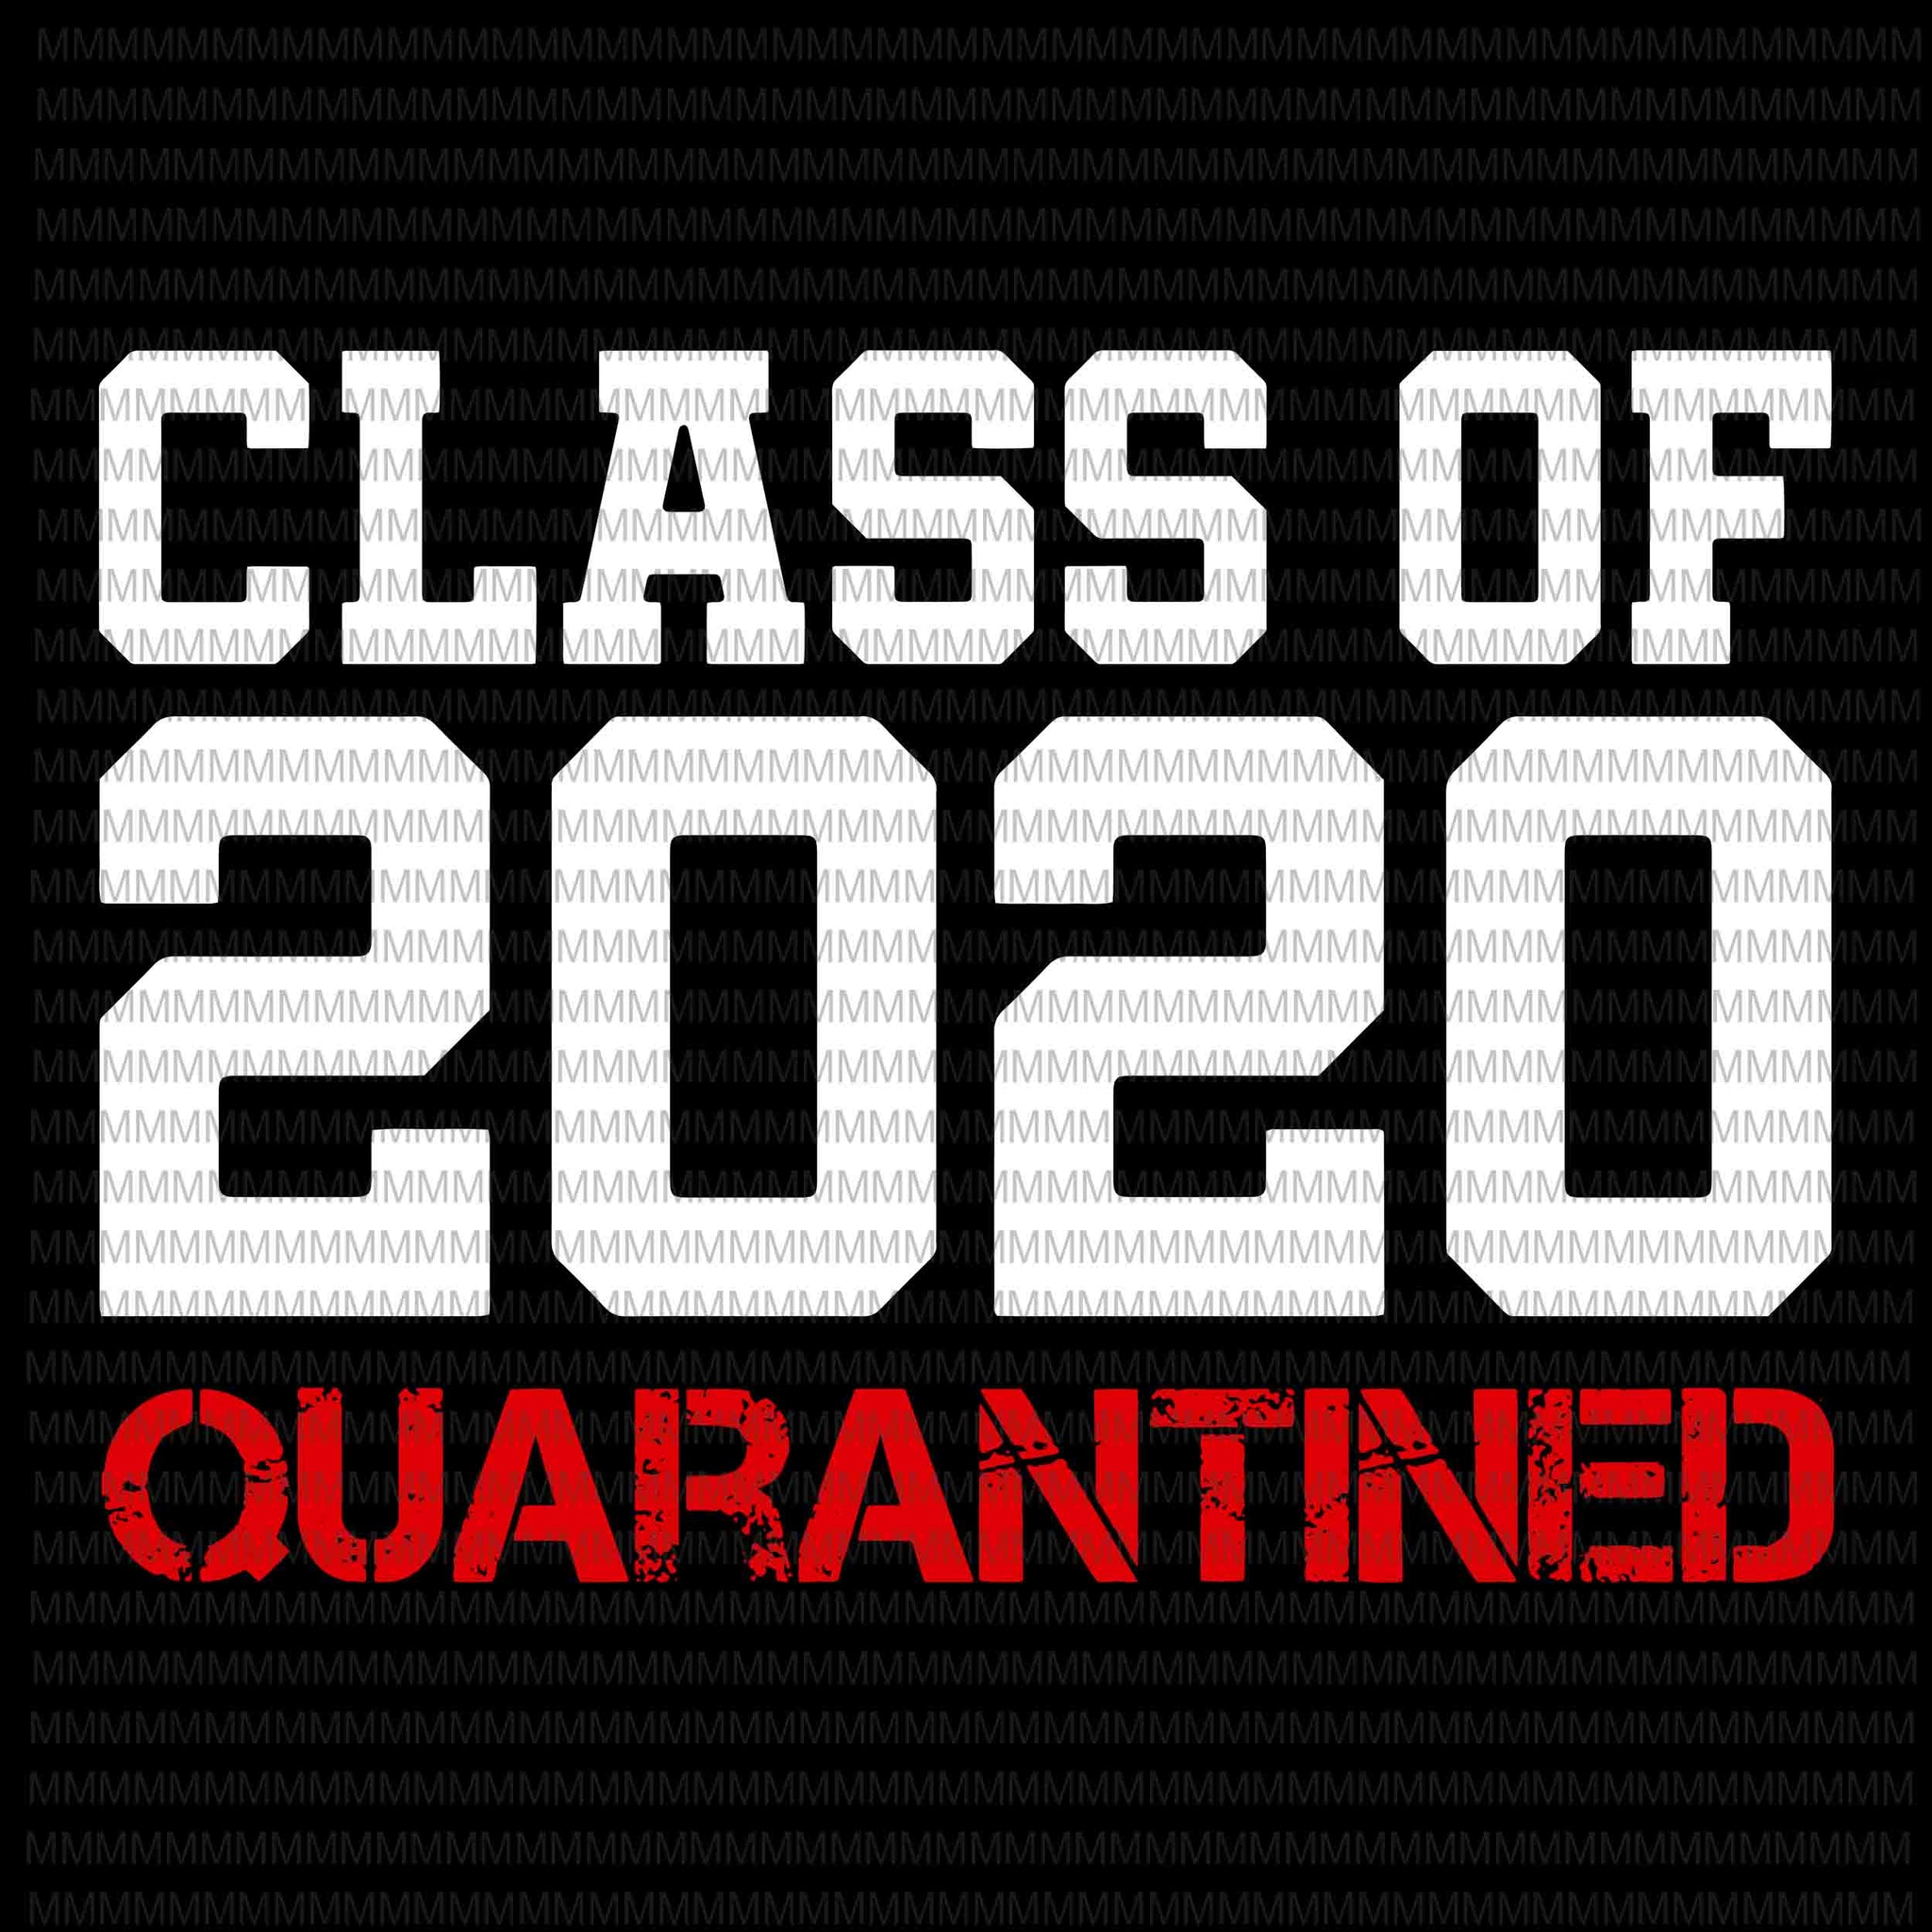 Class of 2020 quarantined svg, Class of 2020, Class of 2020 vector, funny covid 19 vector